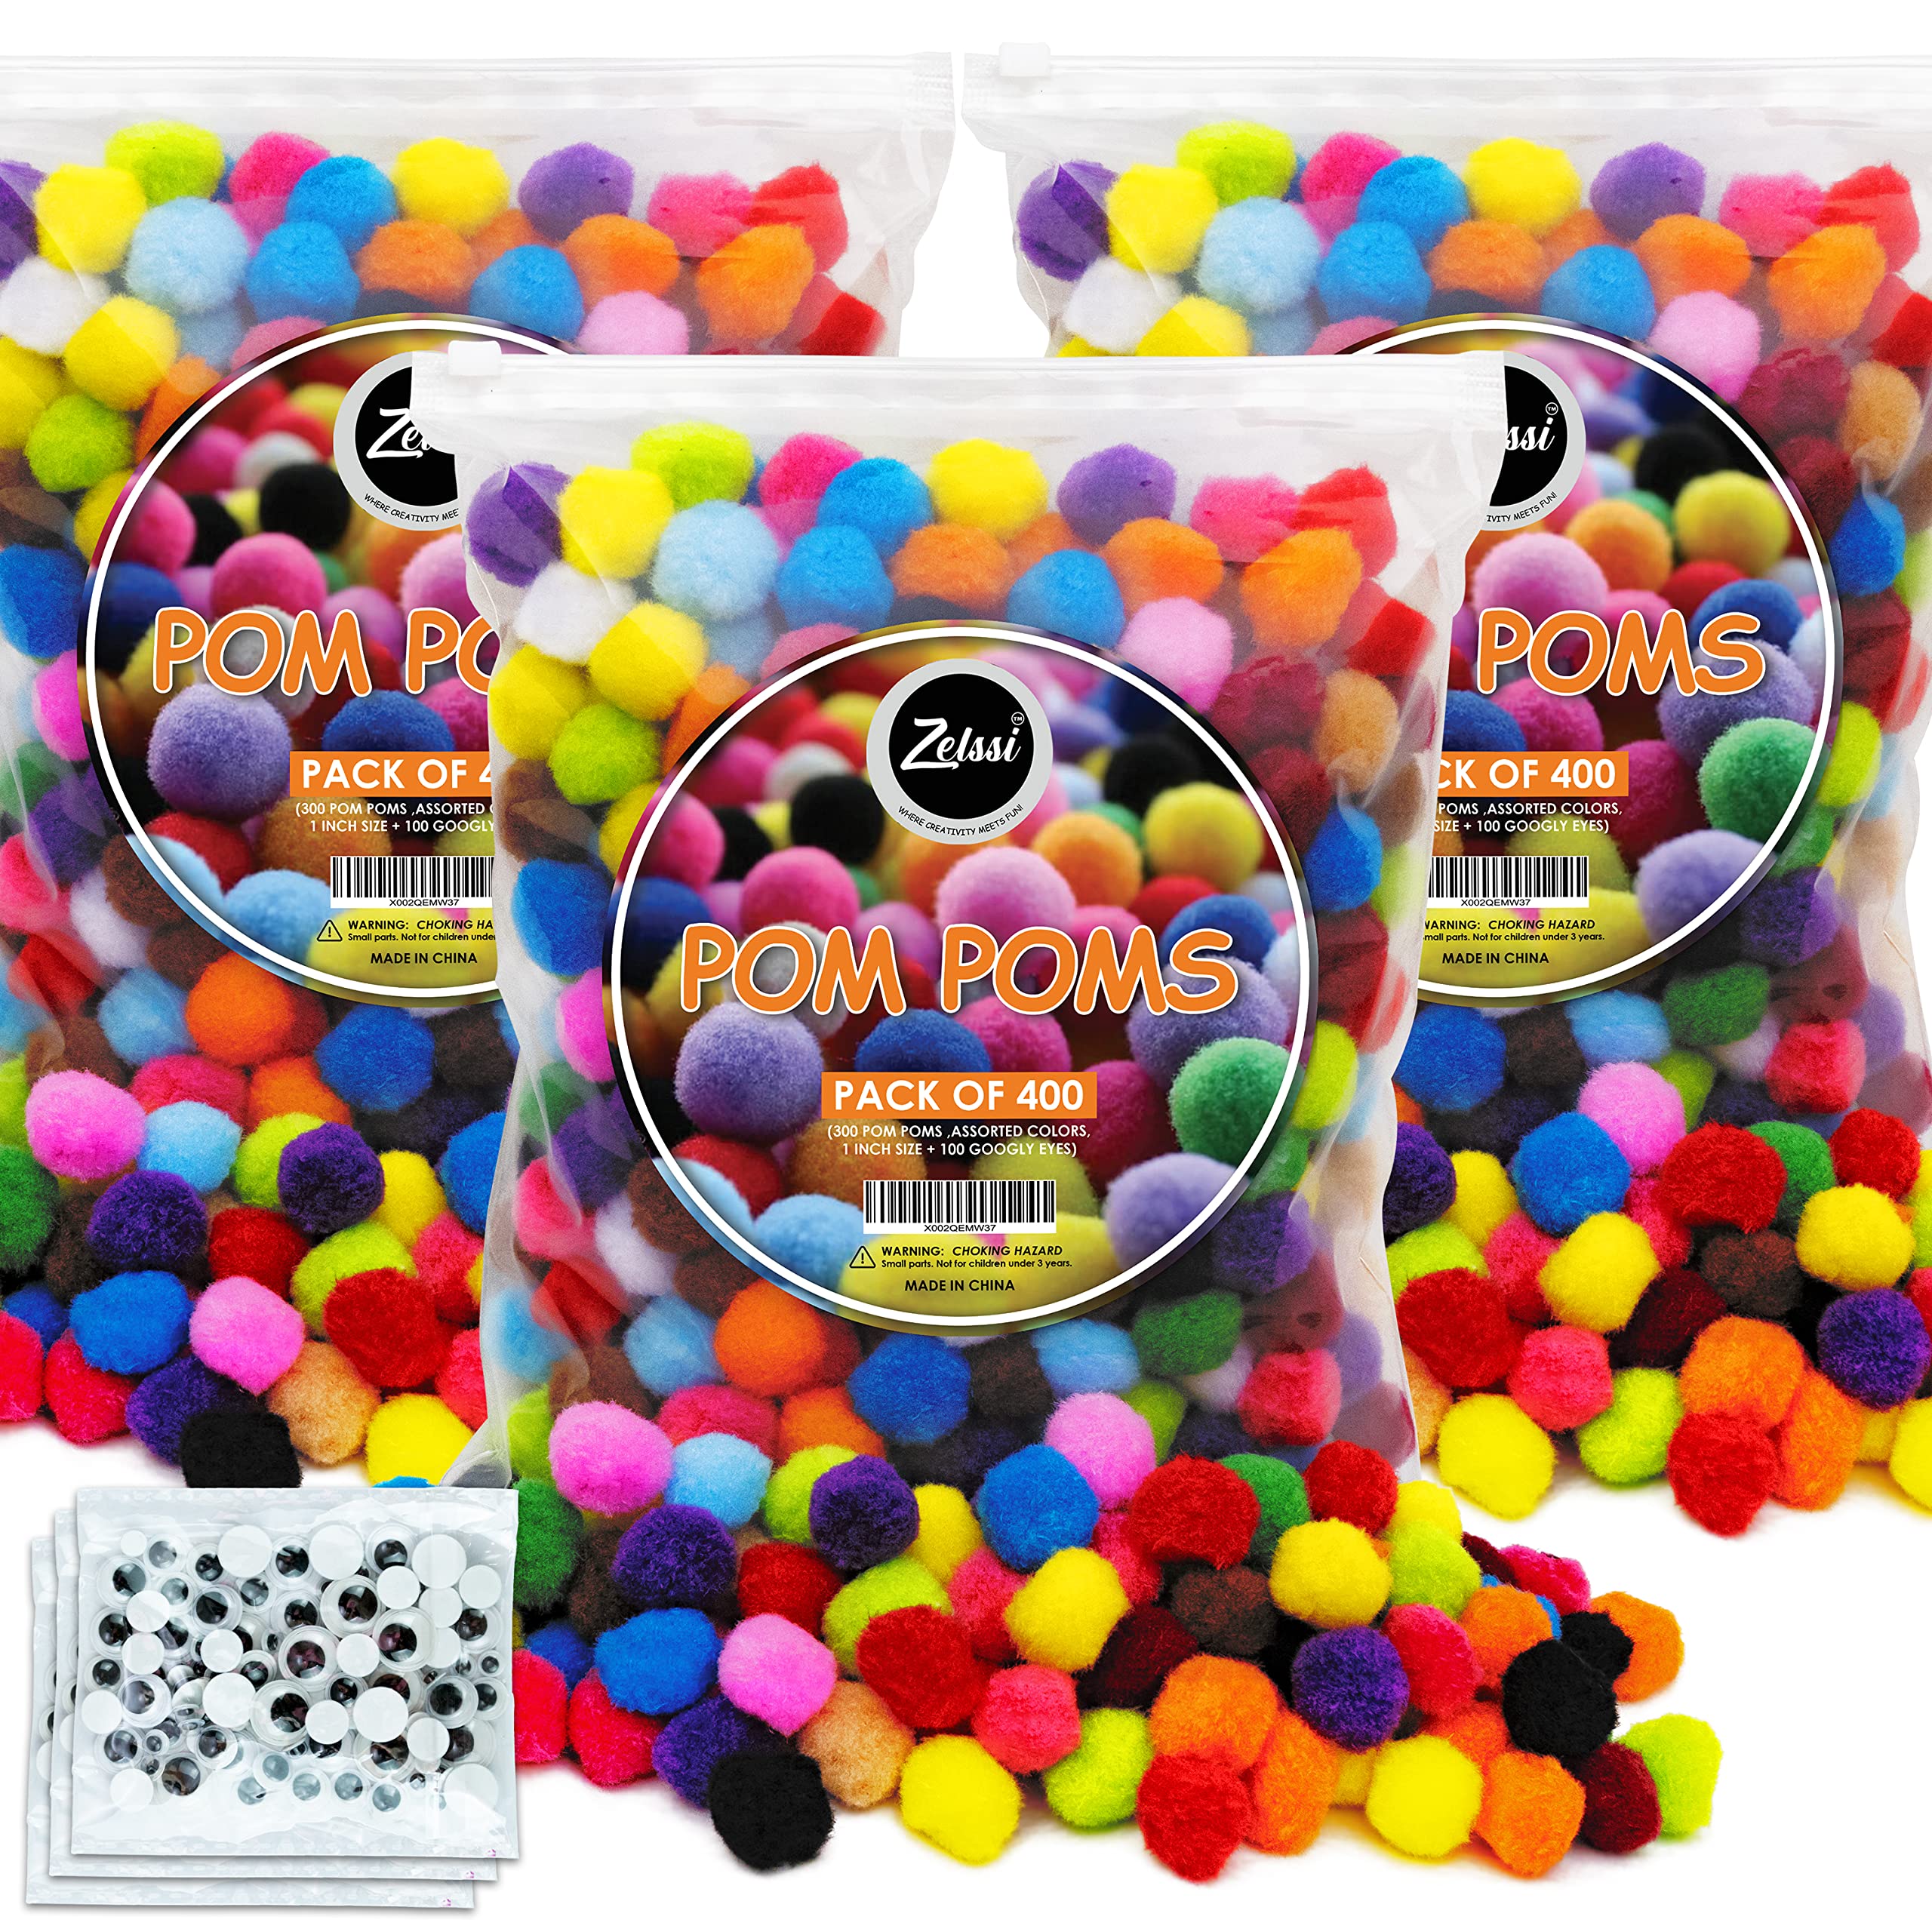 3/4 inch Mutlicolored Small Craft Pom Poms 100 Pieces